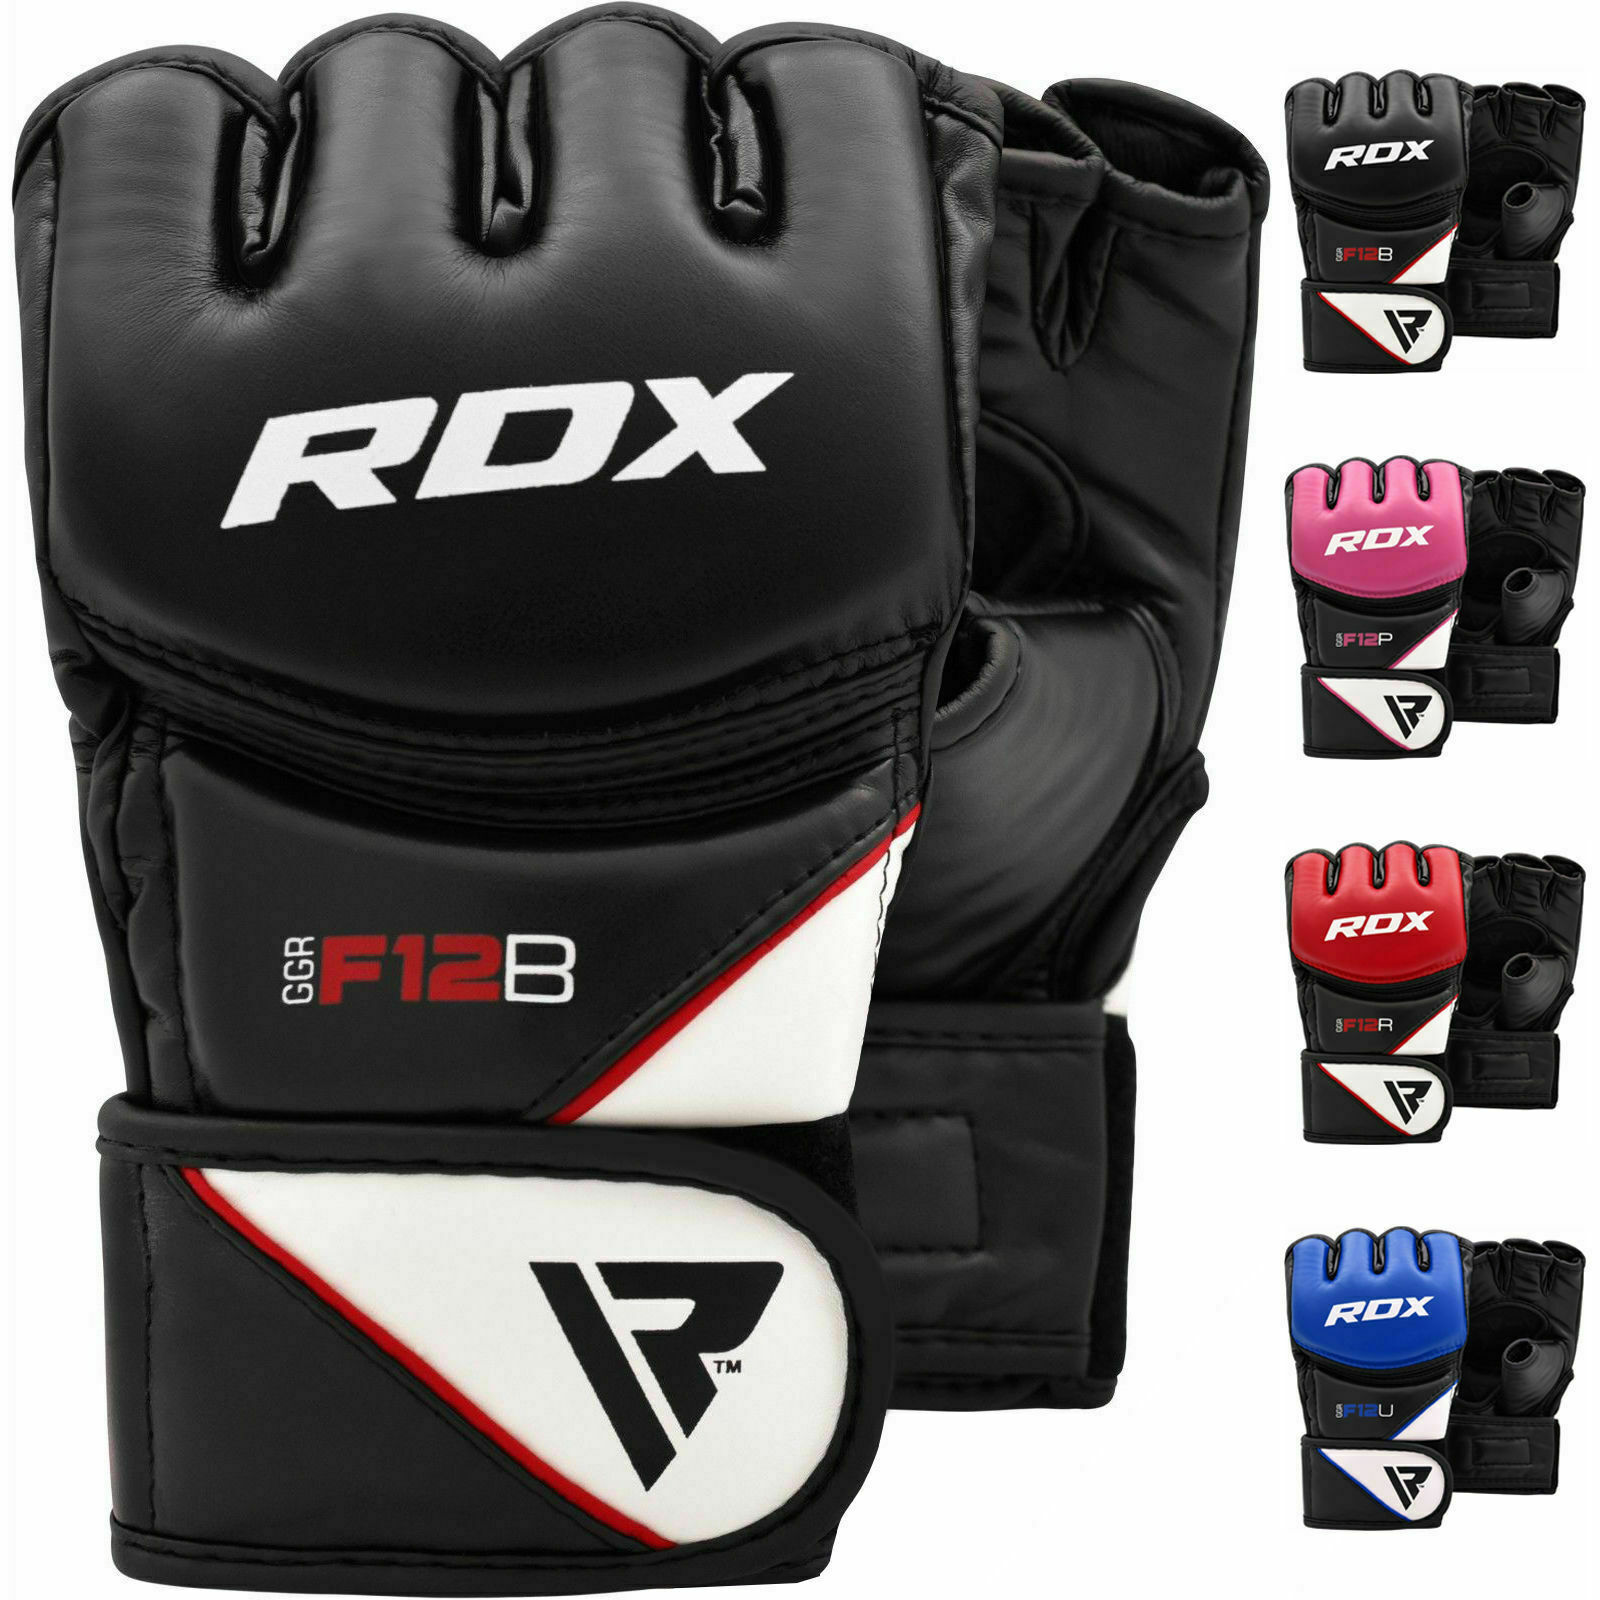 Rdx Mma Gloves Grappling Muay Thai Punching Training Martial Arts Sparring New